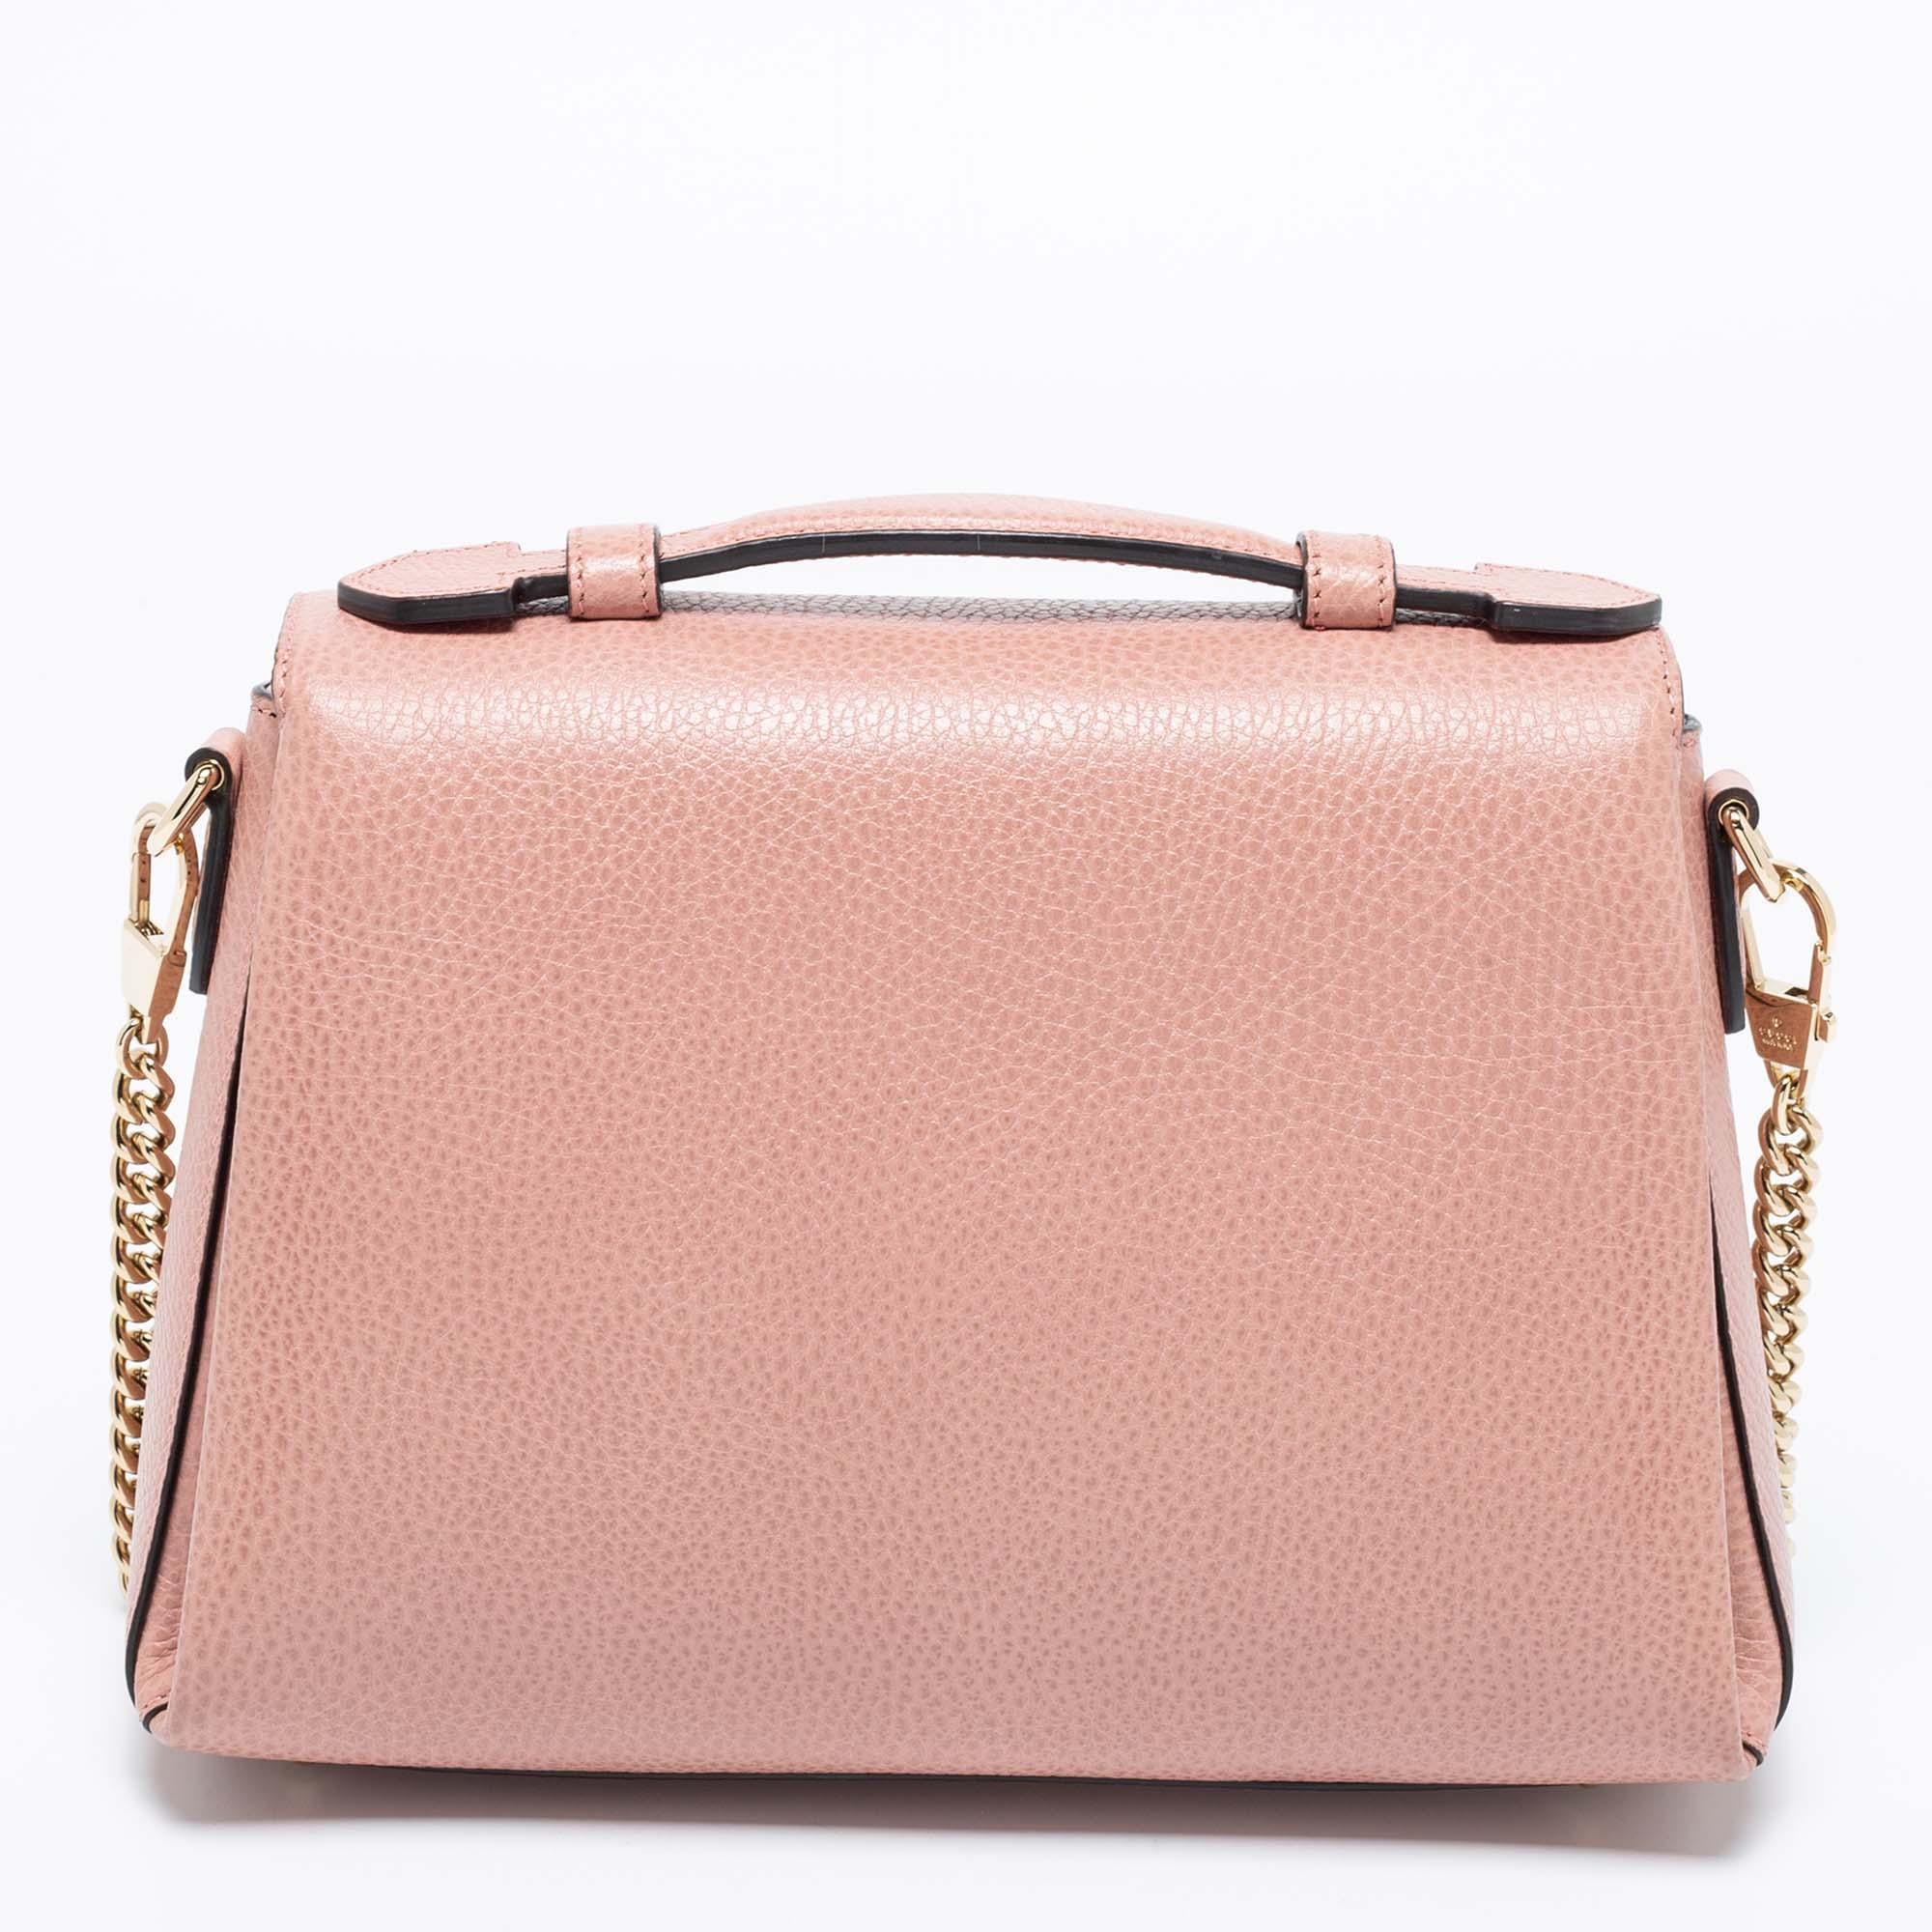 Elegance meets luxury in this stunning bag from the House of Gucci. It is created using dusty-pink leather, with an Interlocking G motif perched on the front. It features a fabric-lined interior, gold-tone hardware, and a sturdy top handle. This